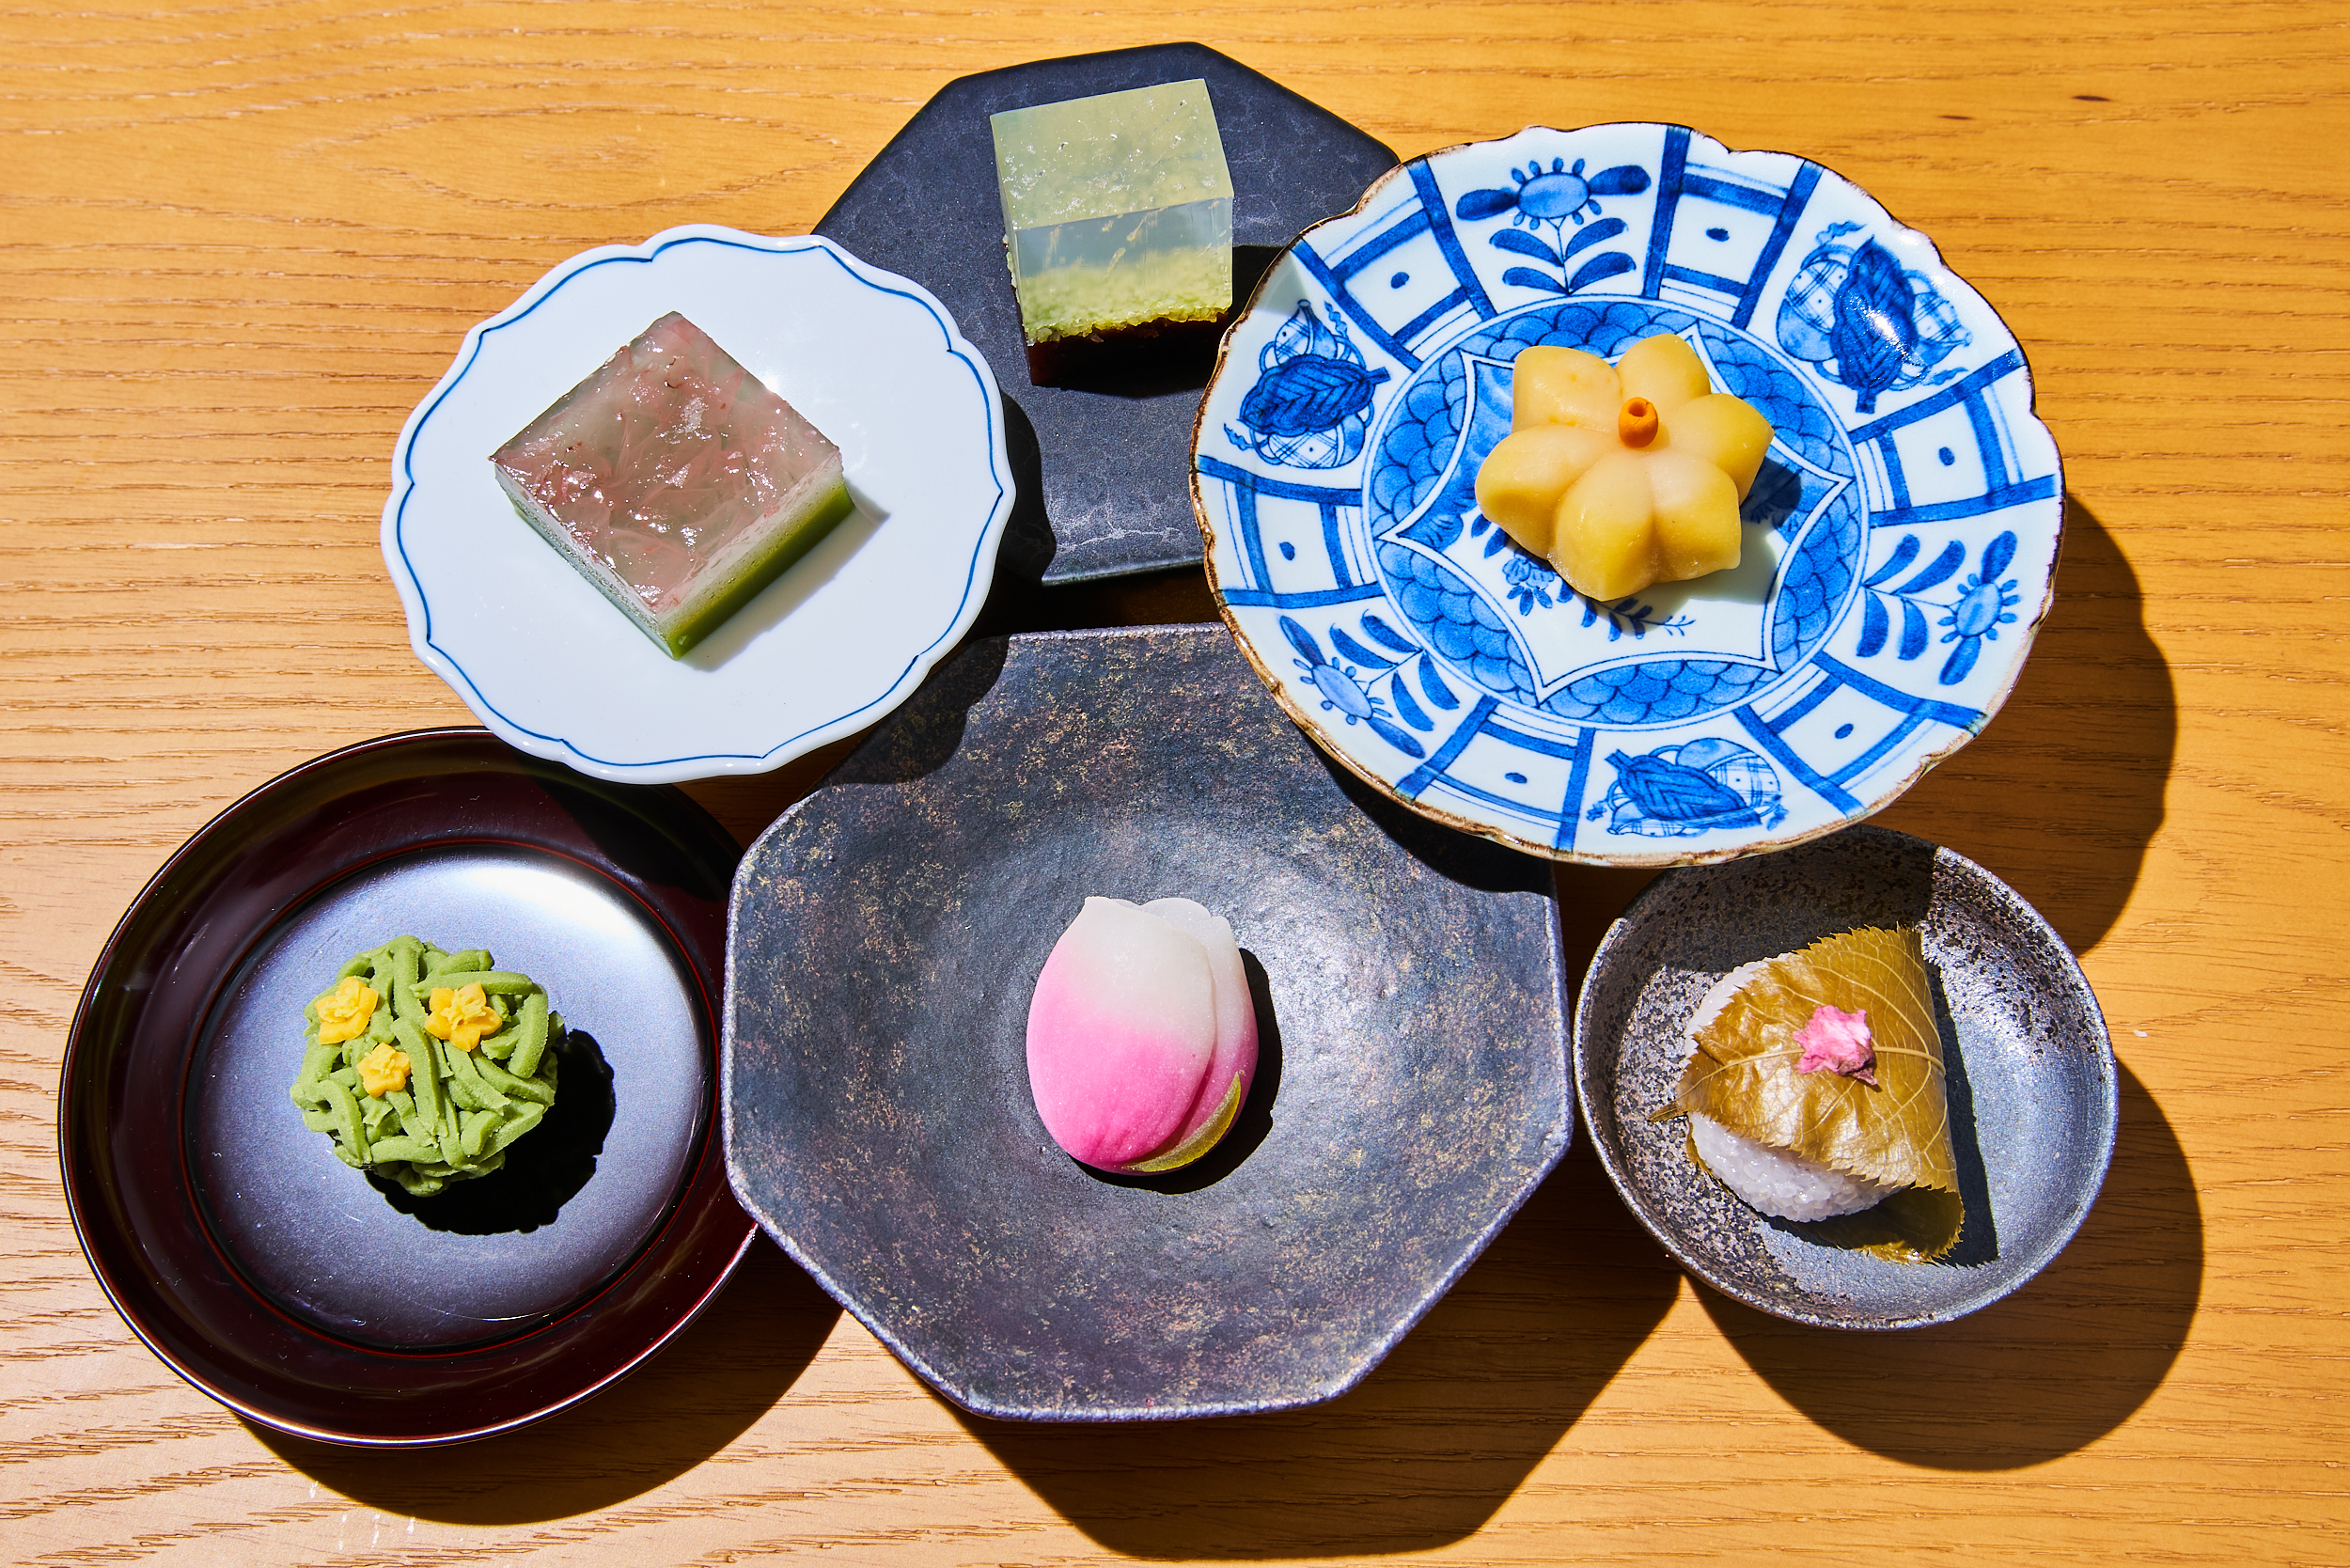 Wagashi are made by Phoebe Ogawa in Long Island City.